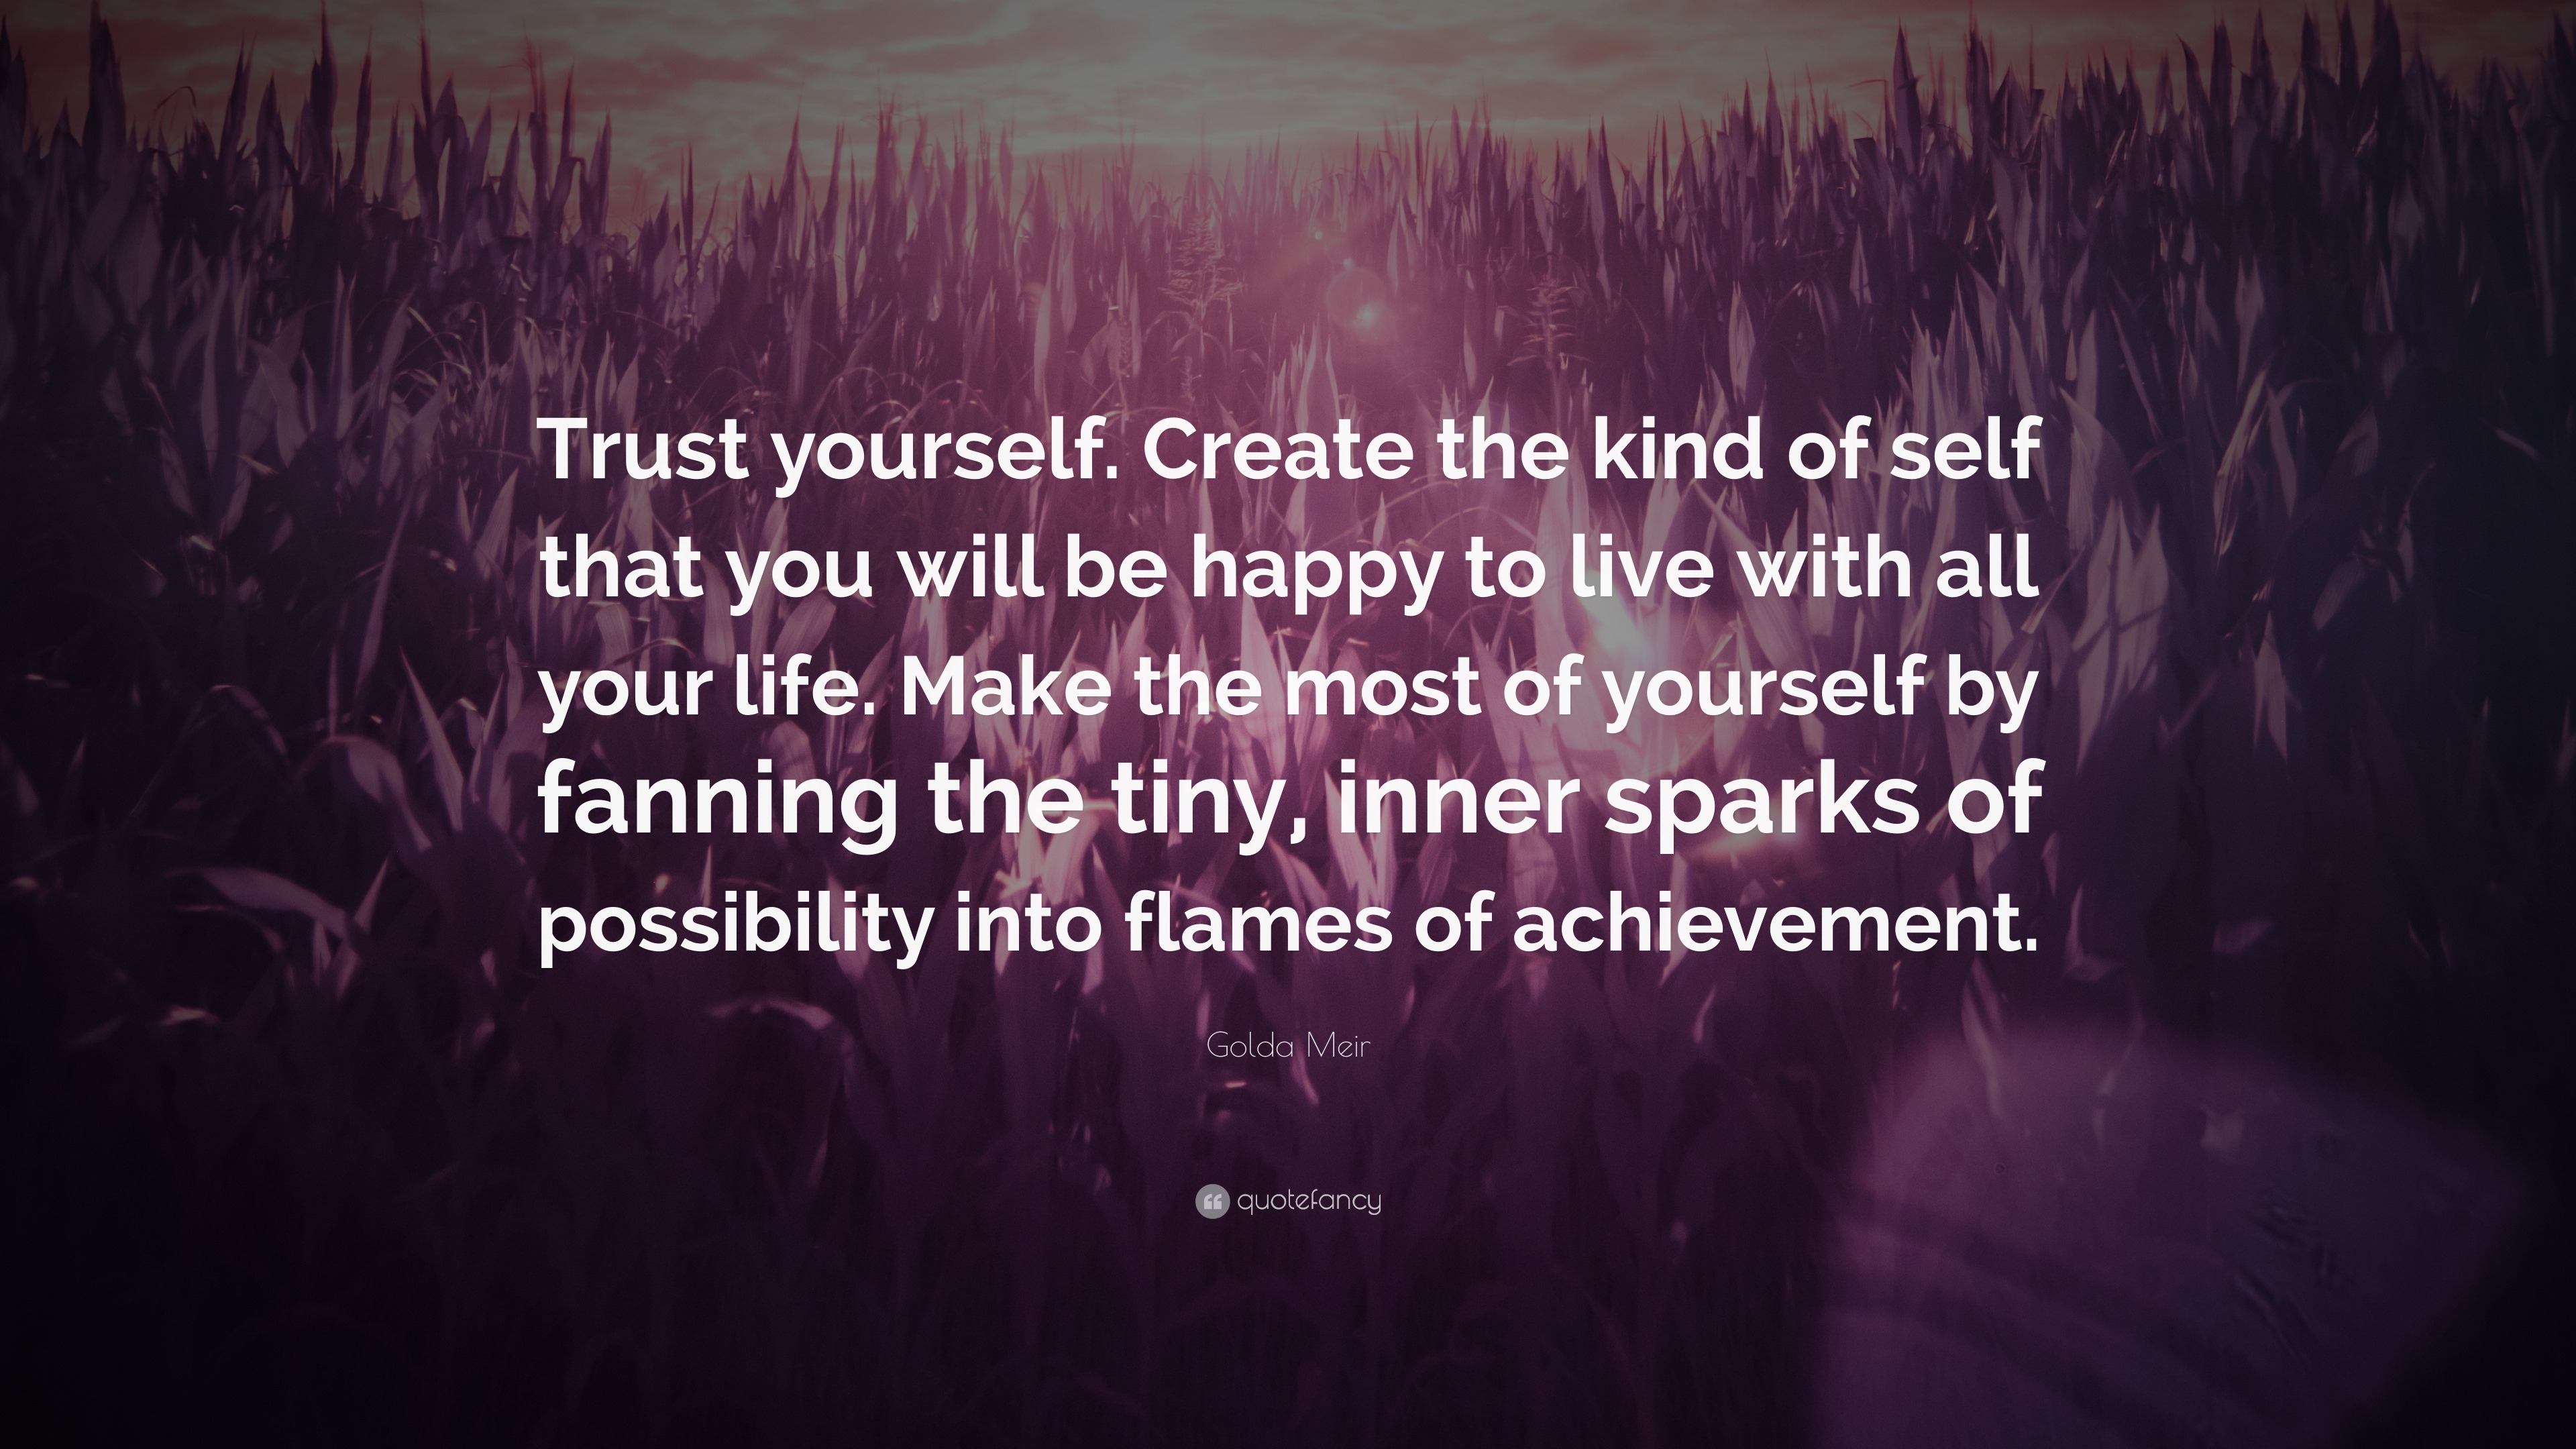 Golda Meir Quote: “Trust yourself. Create the kind of self that you